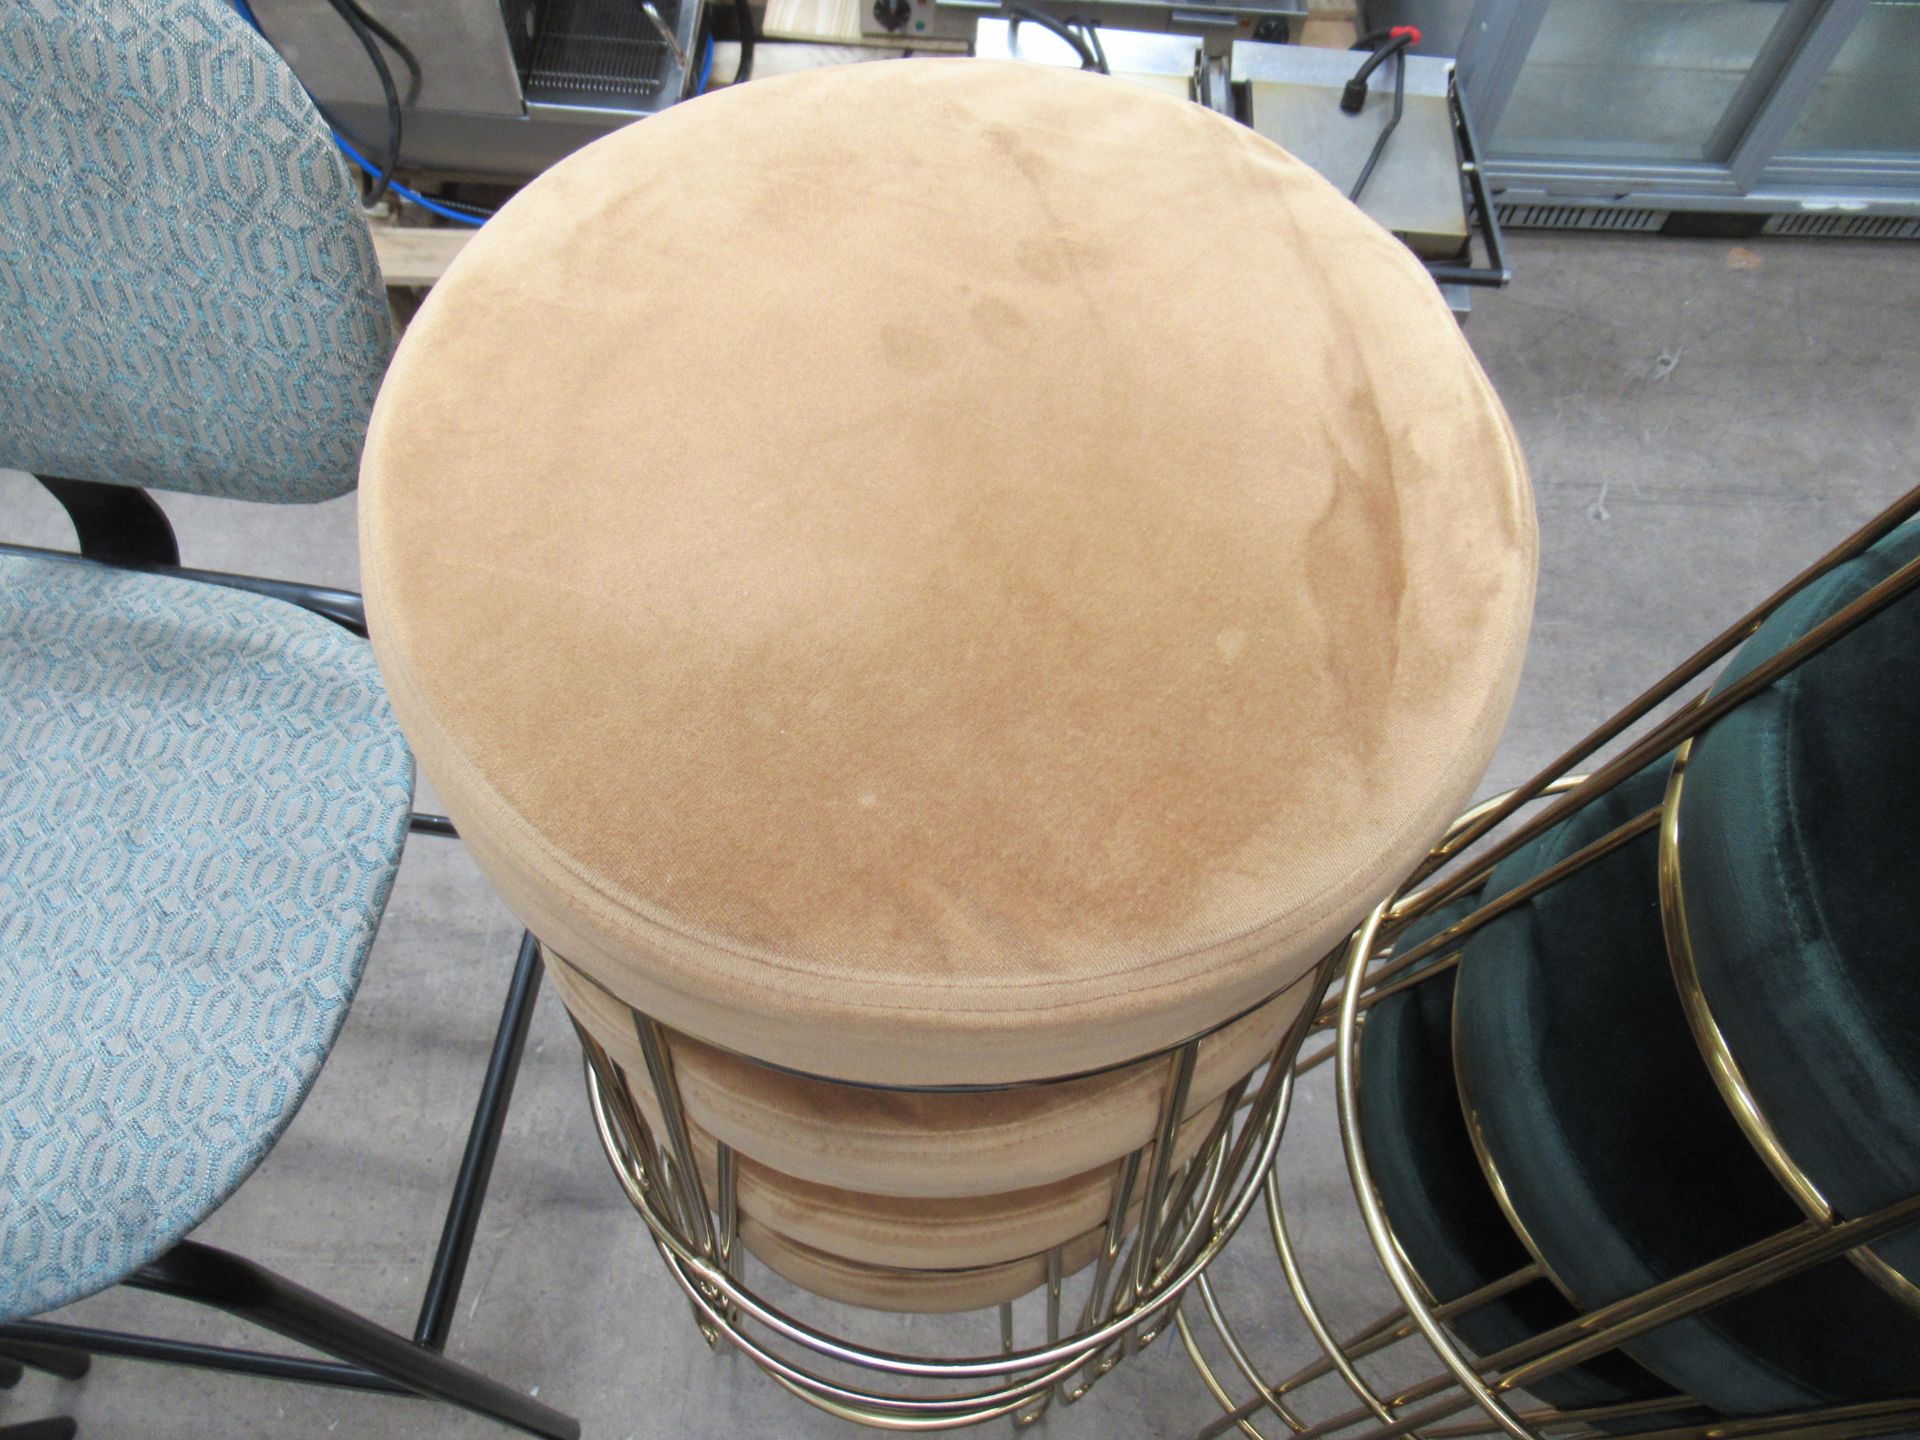 12x Suede Effect Stools - Image 4 of 7